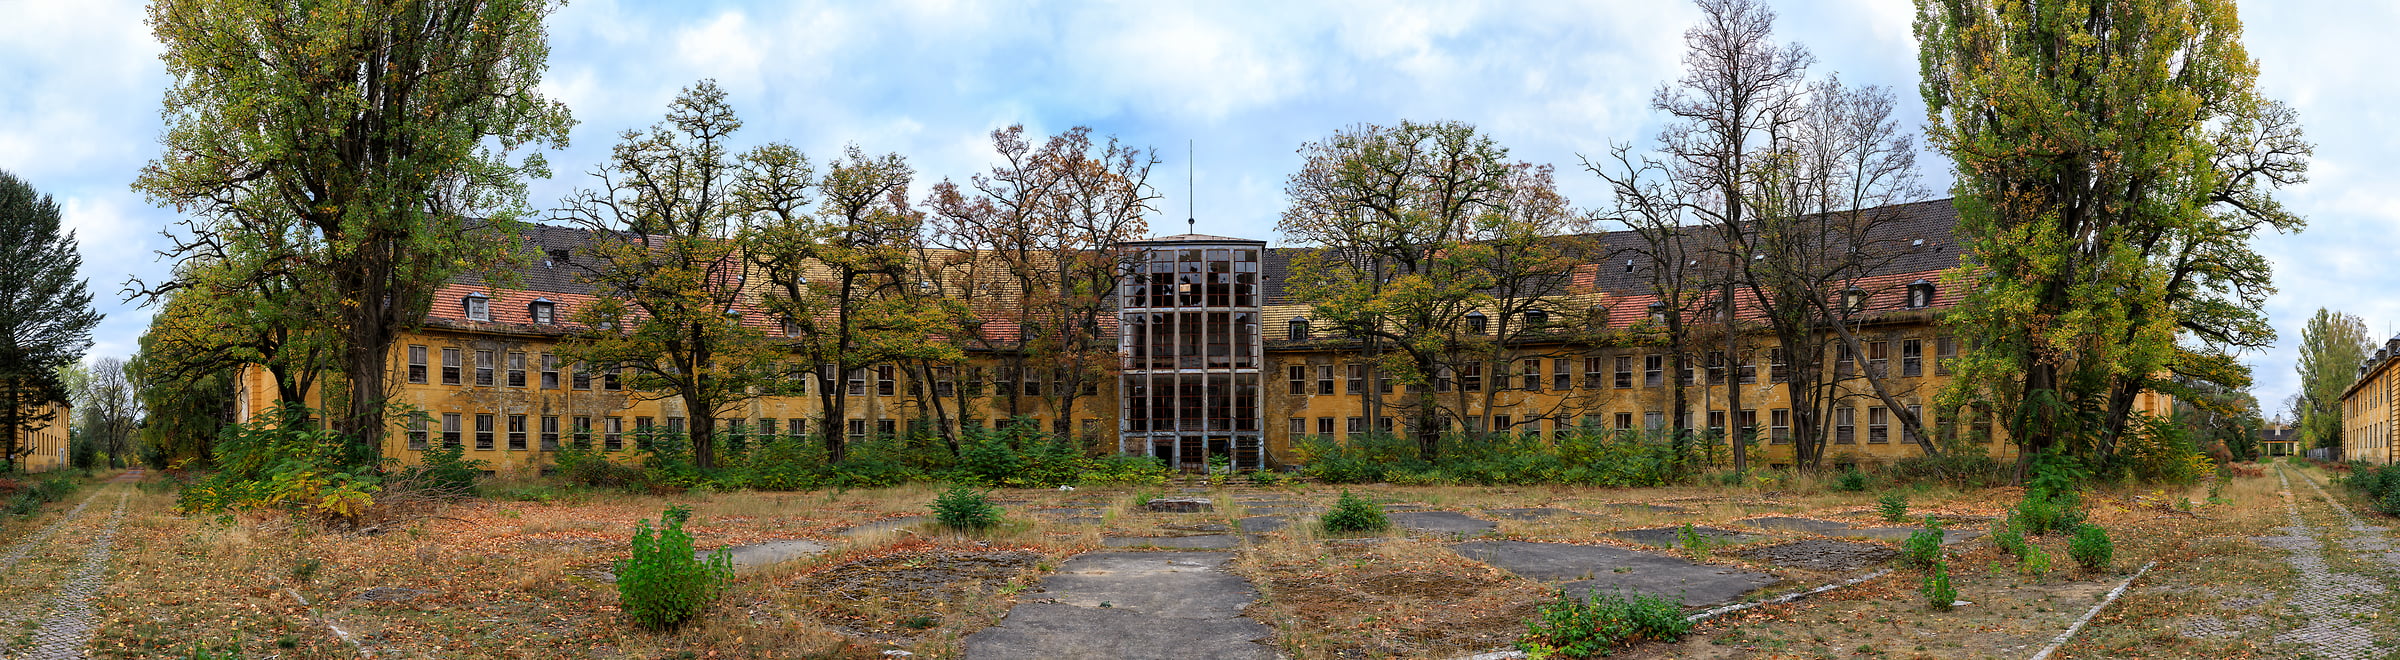 1,054 megapixels! A very high resolution, large-format VAST photo of a creepy abandoned building; panorama photograph created by Scott Dimond in Juterbog, Germany.